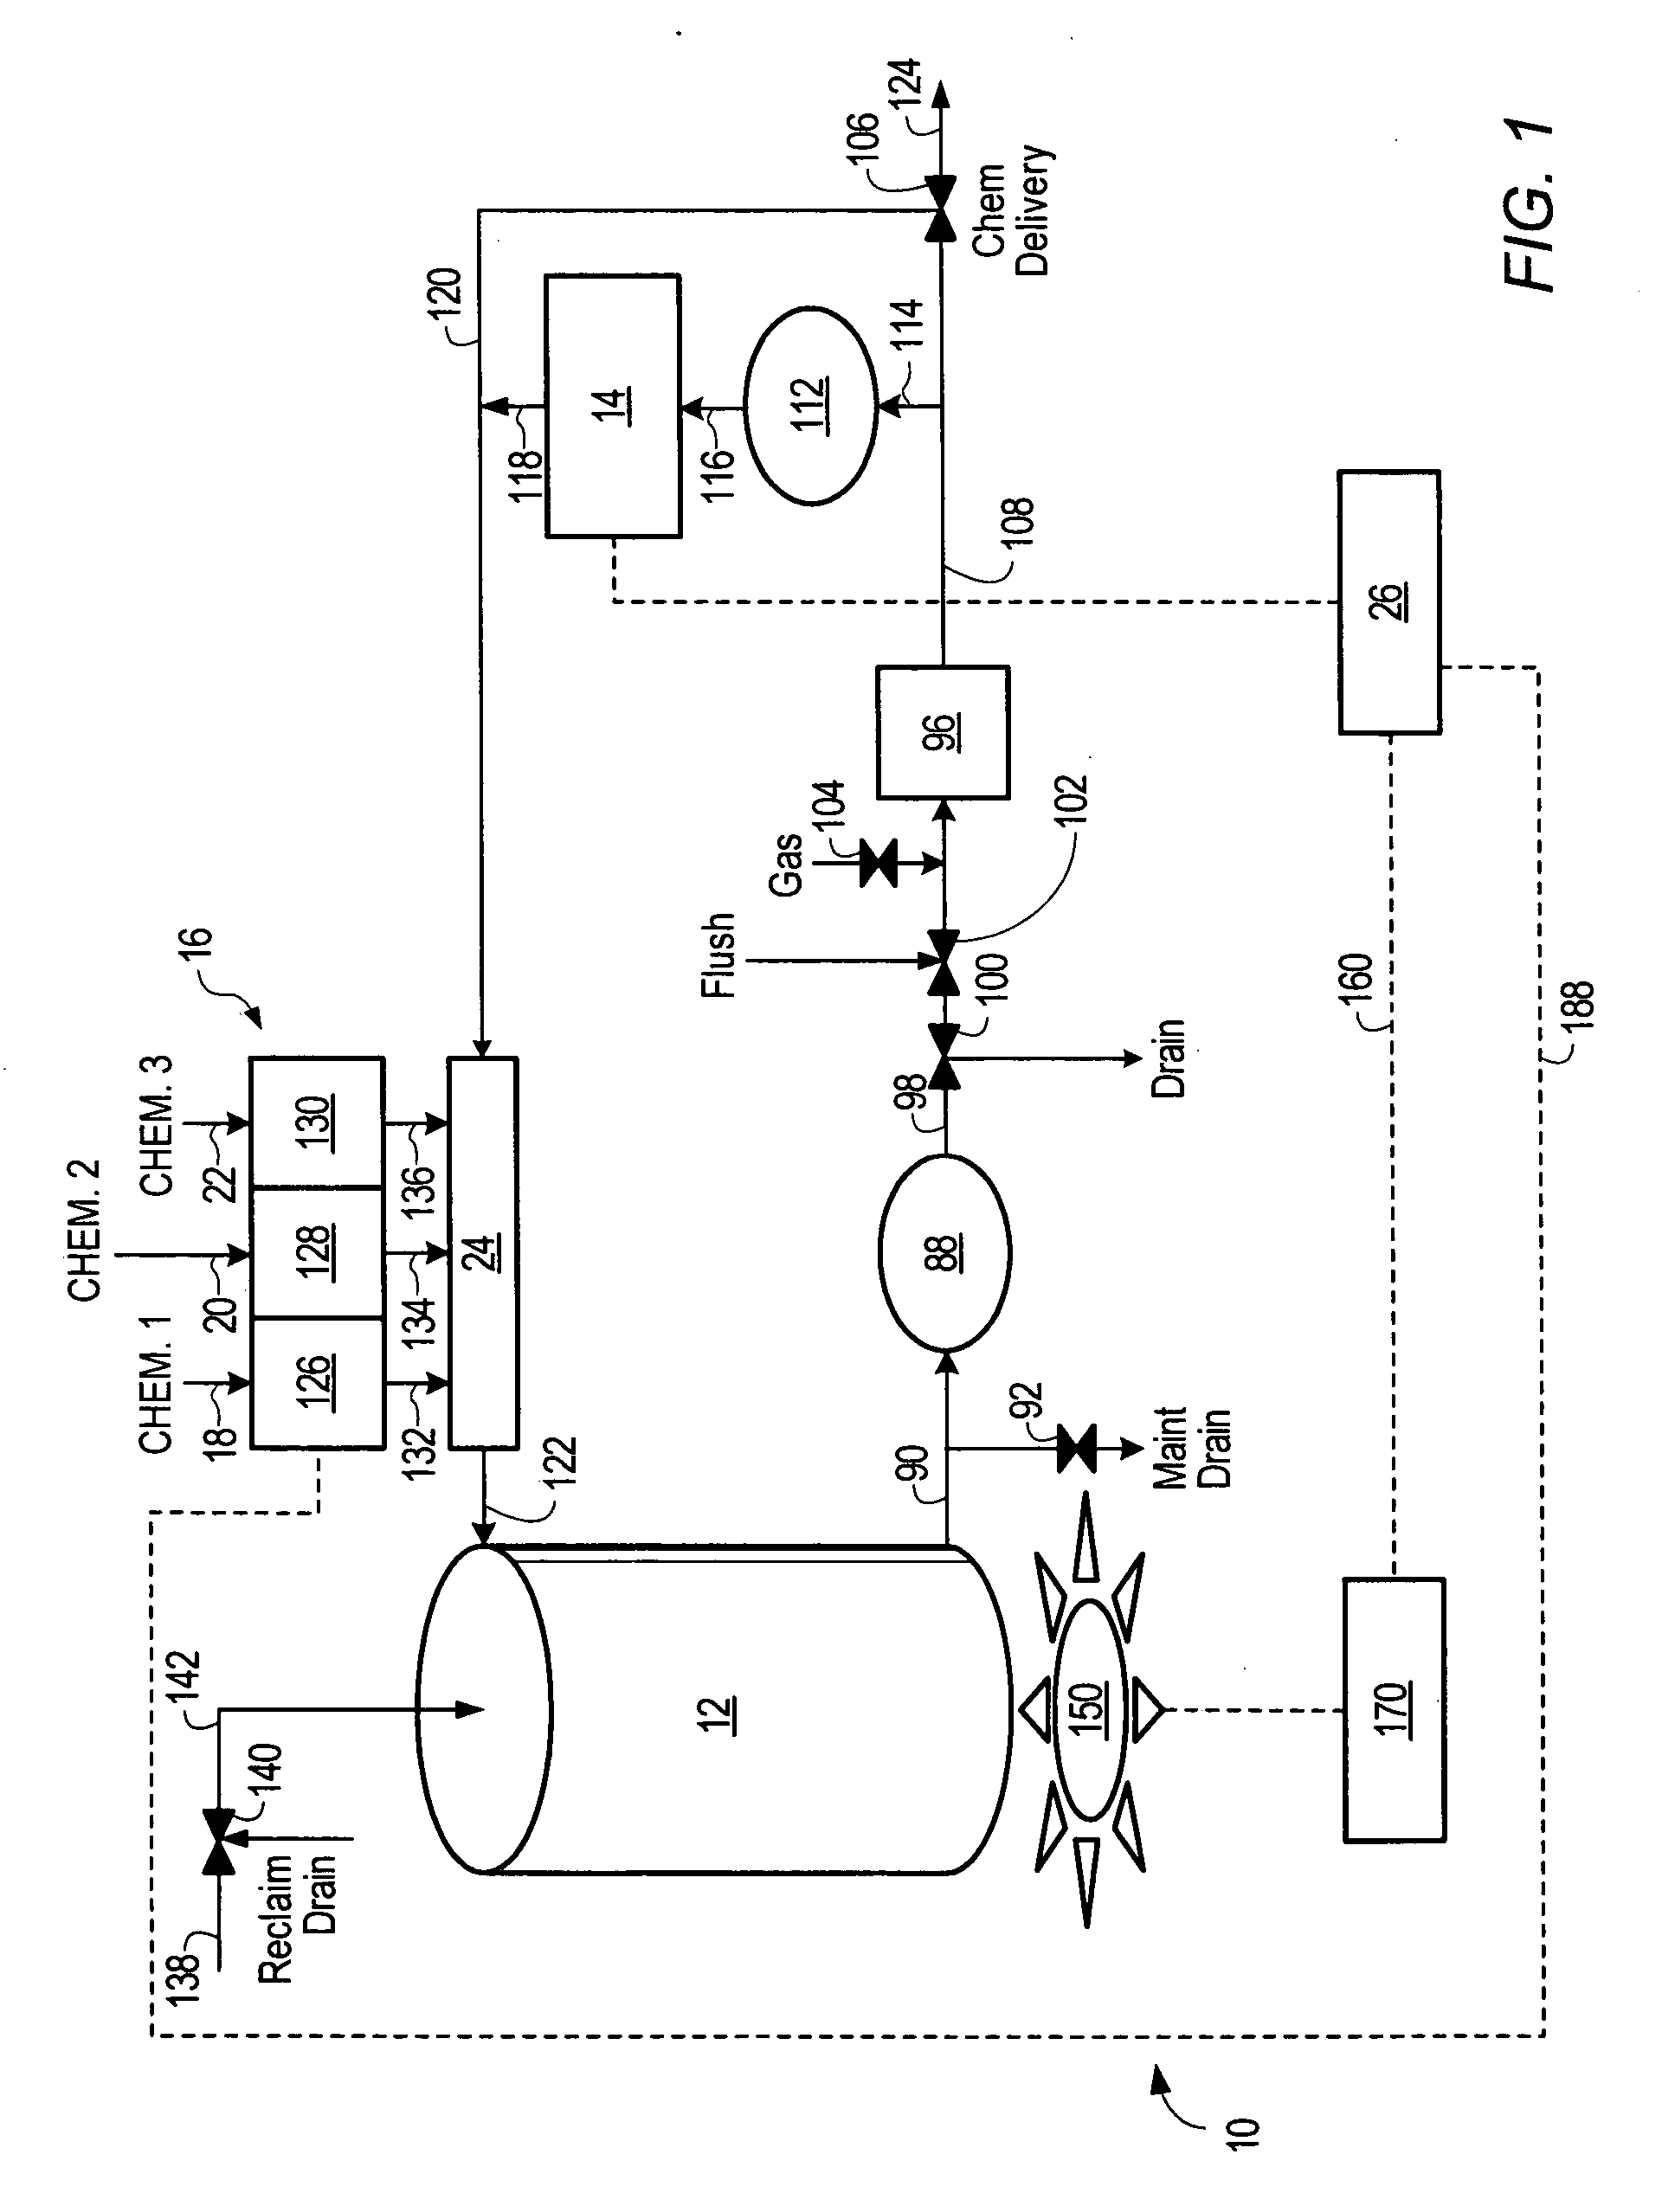 Point-of-use mixing method with standard deviation homogeneity monitoring